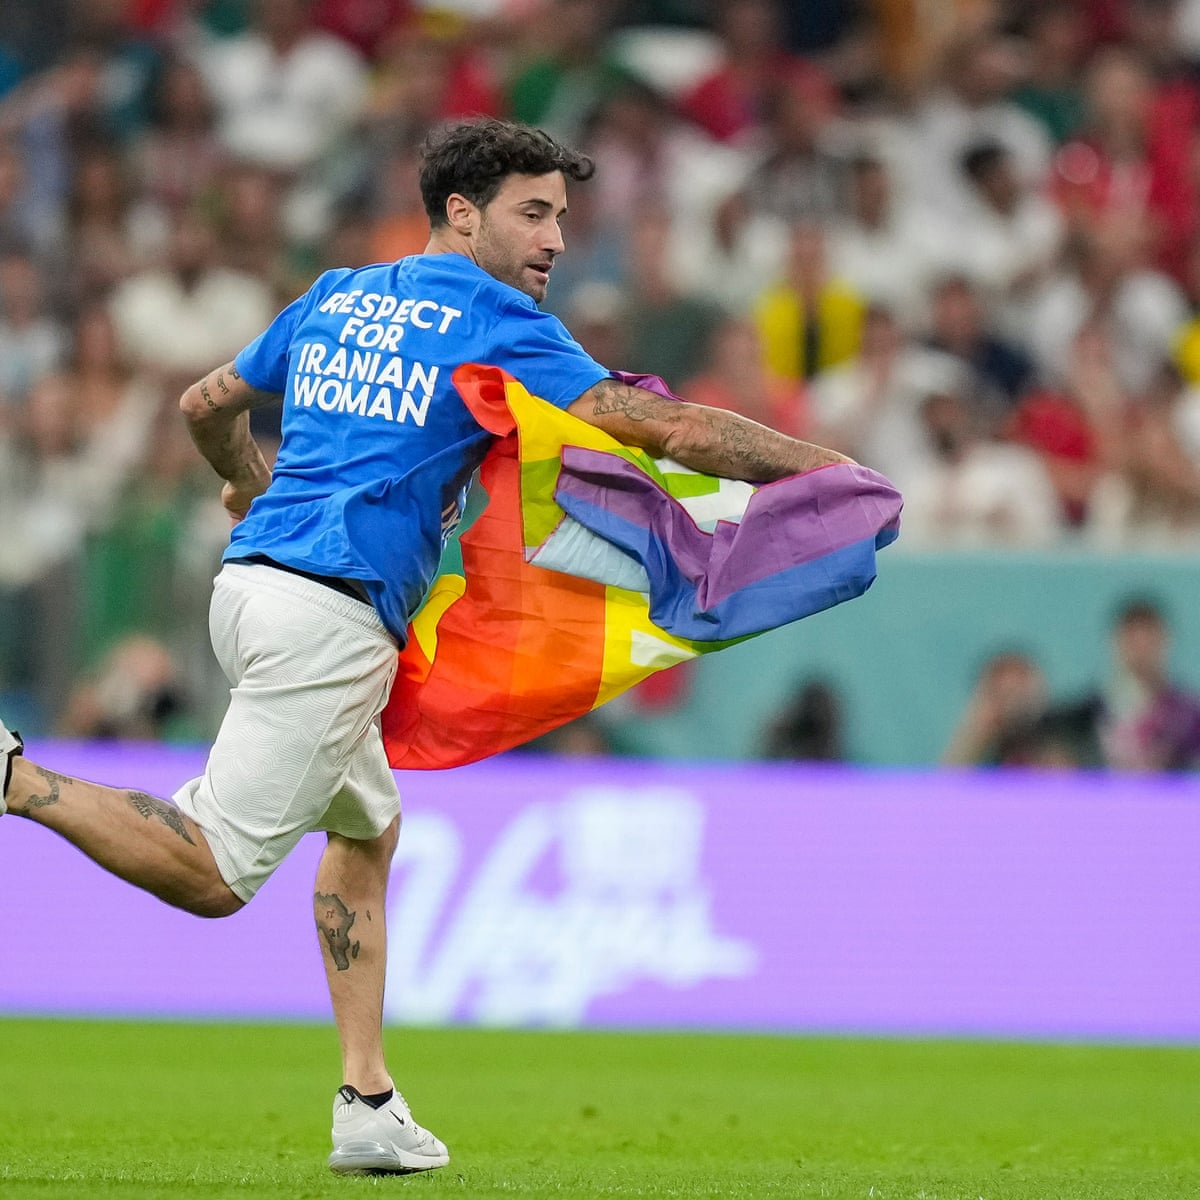 Respect For Iranian Women' protester invades pitch at World Cup ...